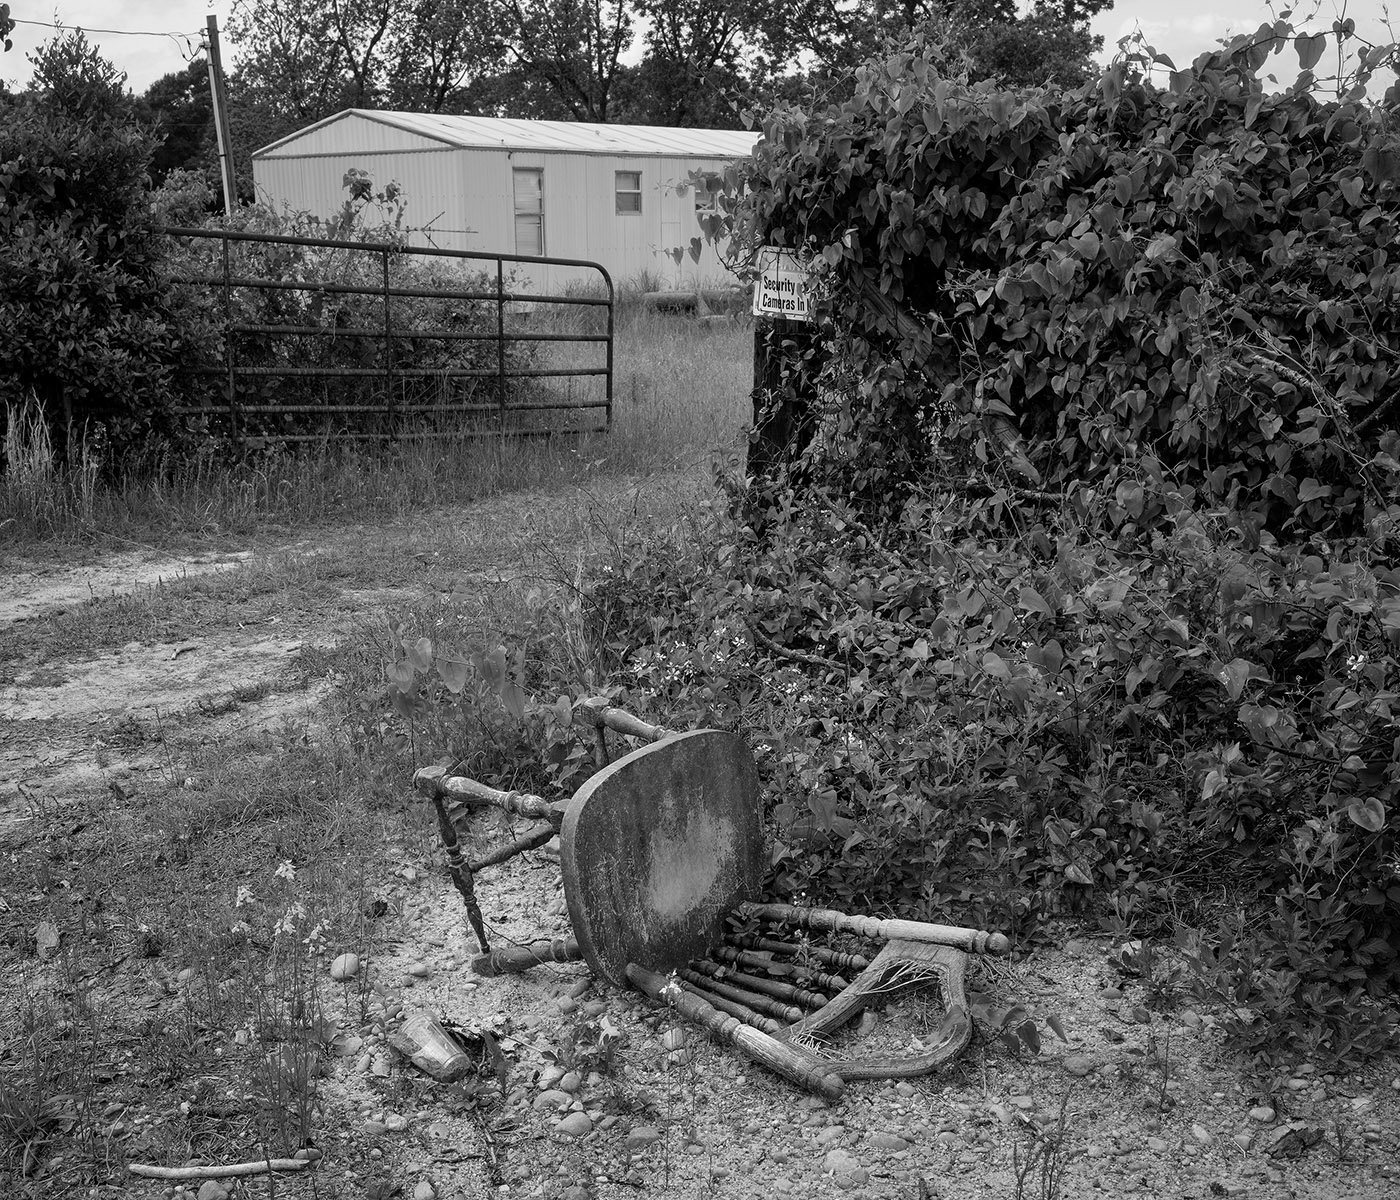   Macon County, Ala. Near the former site of Fort Bainbridge.   Archival Pigment Print Image: 2021 / Printed: 2022 15 x 17 1/2 in (image size) Edition: 1/10 The Do Good Fund, Inc., 2022-021 